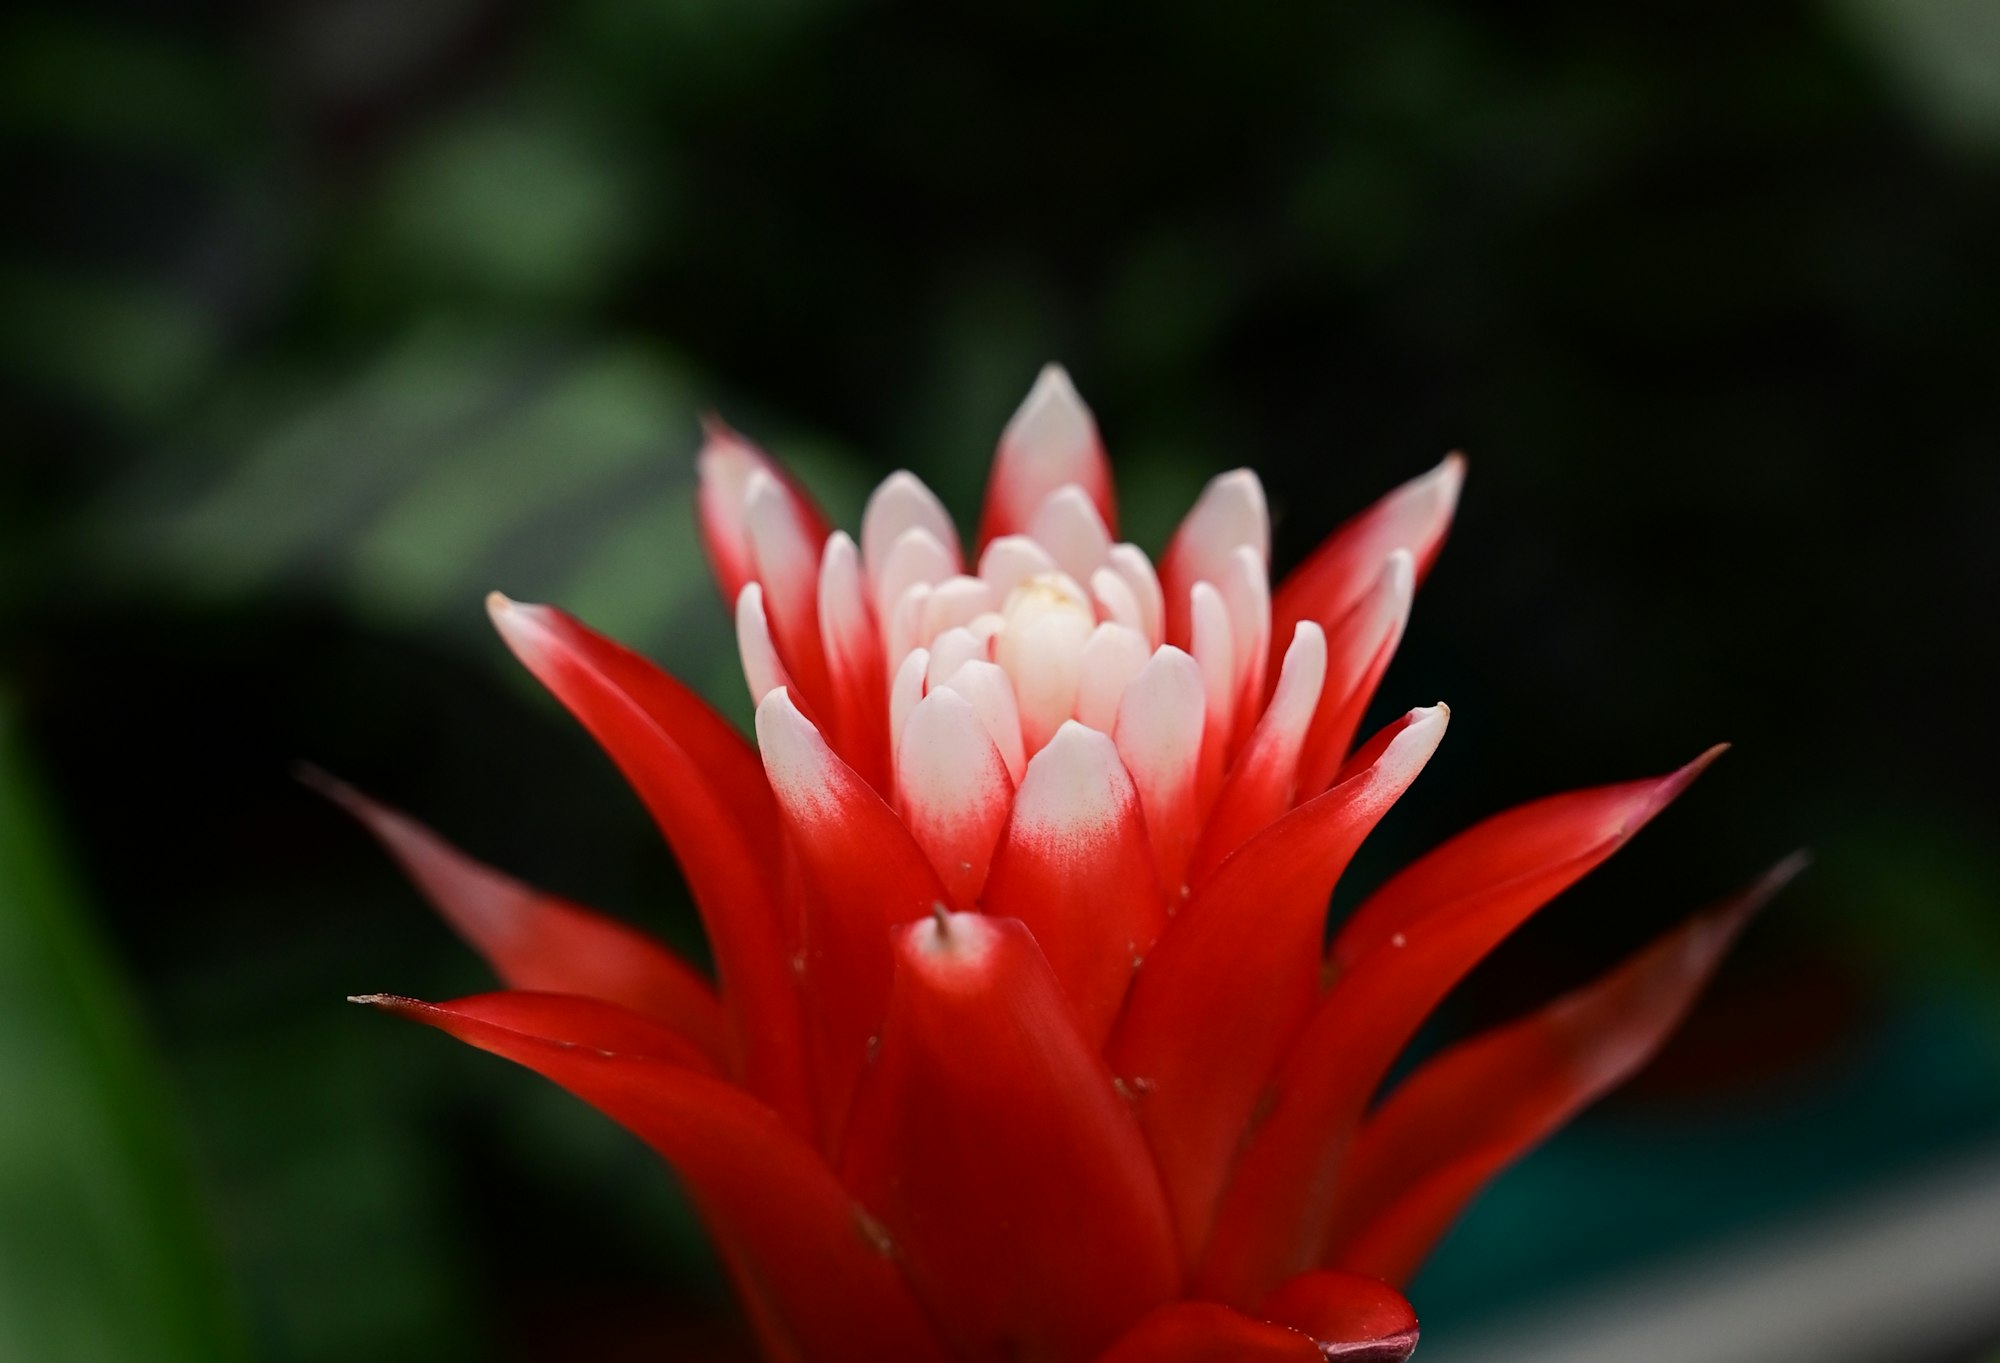 red bromeliad flower on dark background gift to a woman, houseplant